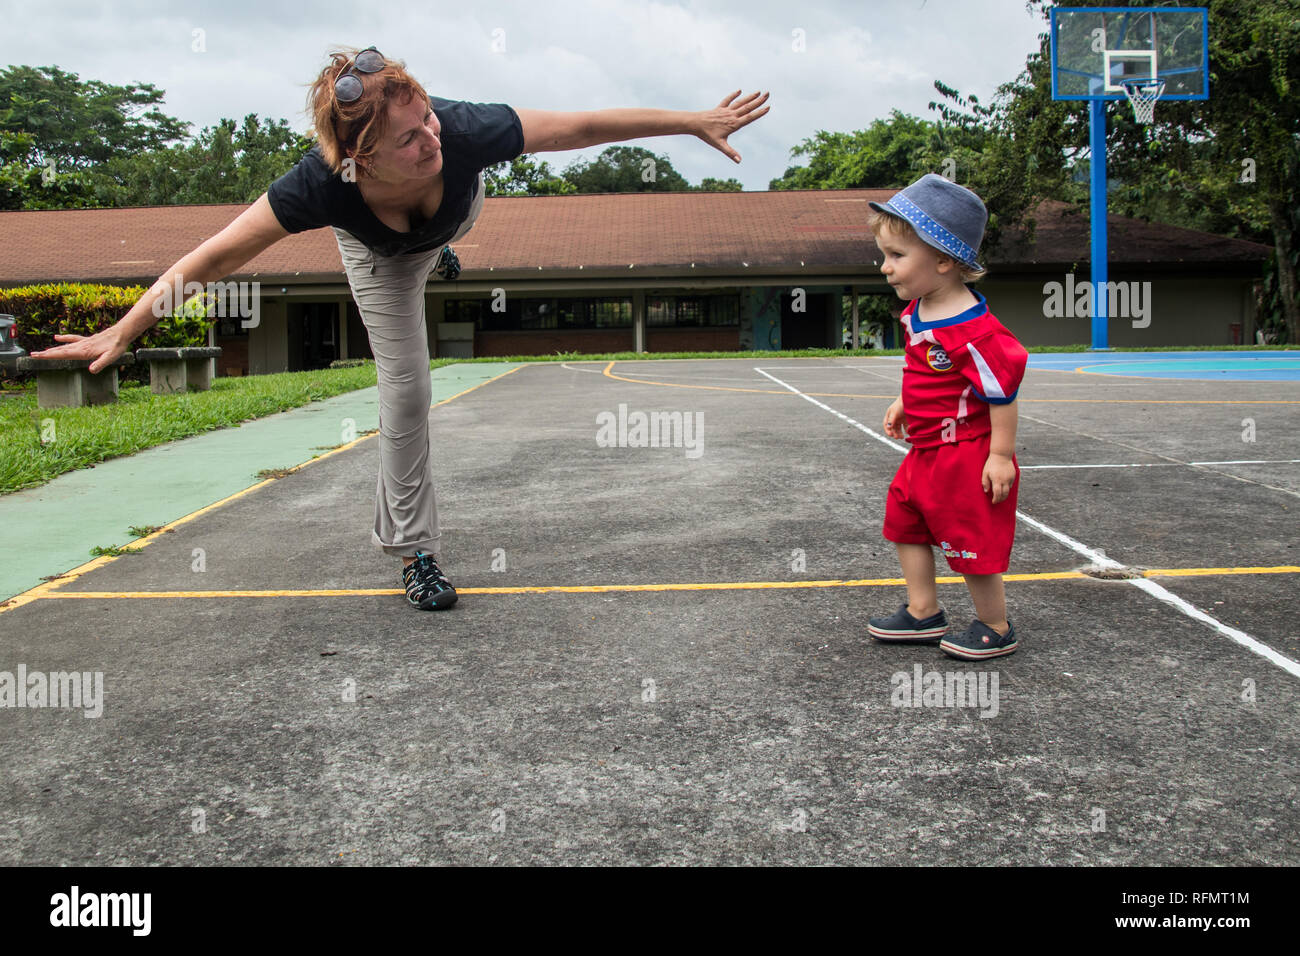 A woman and a young boy in a football outfit are working out on a basketball court Stock Photo